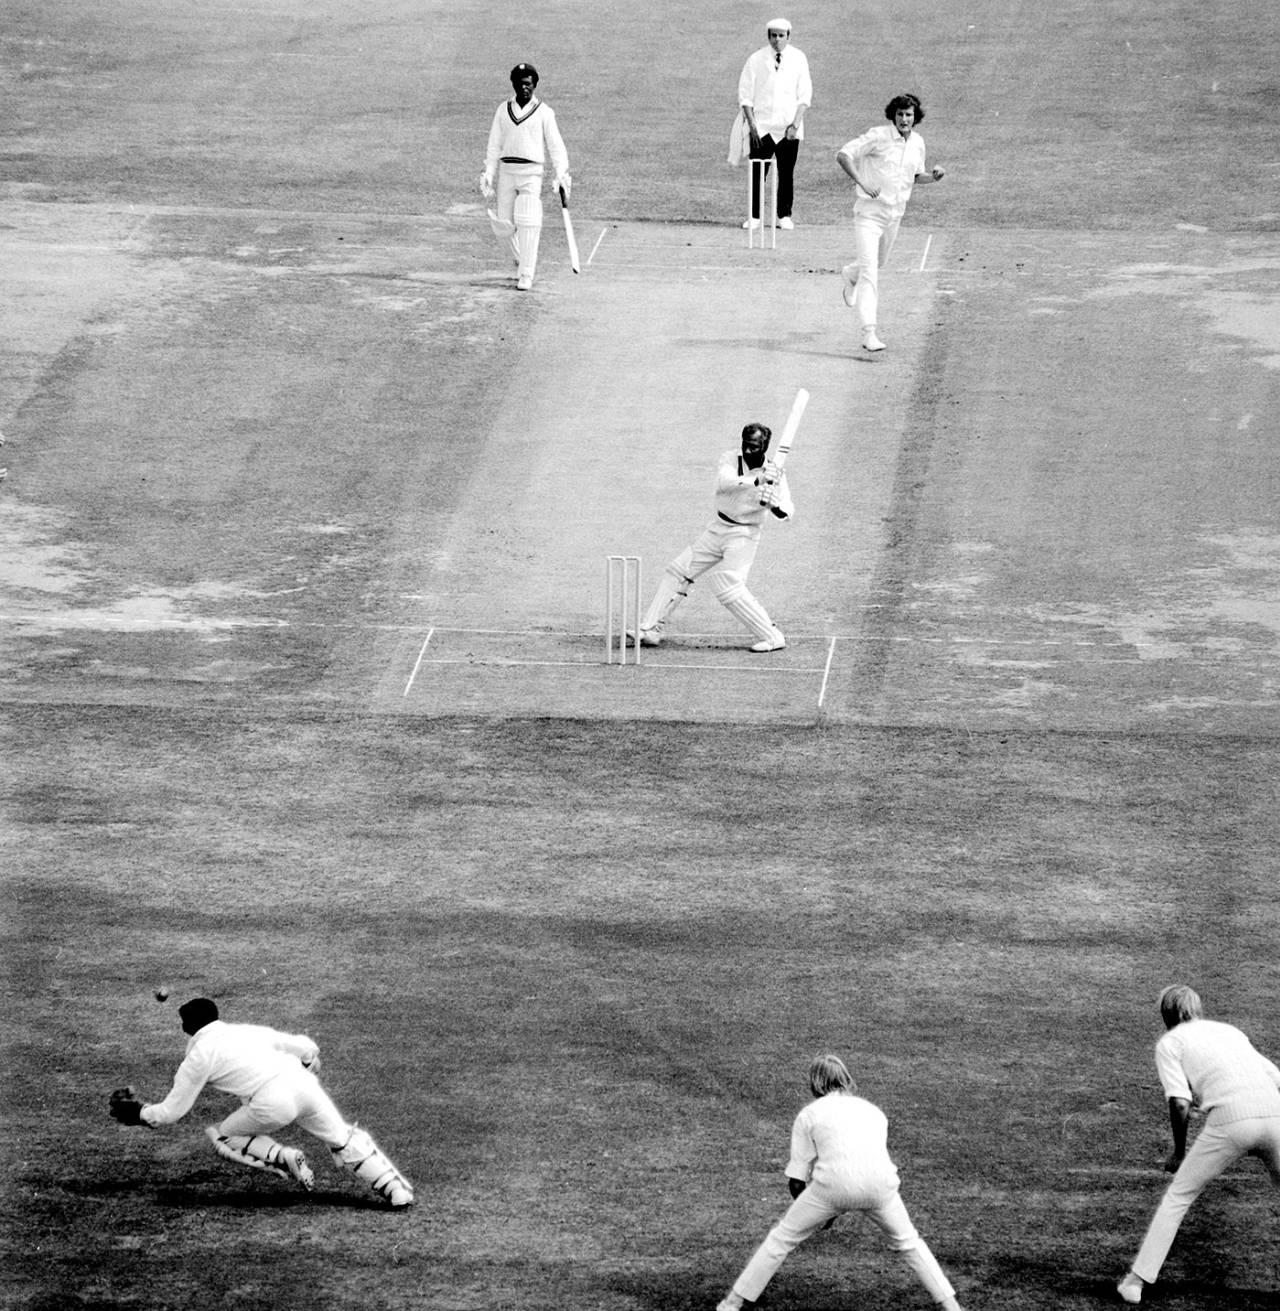 Rohan Kanhai swings at and misses a ball from Bob Willis and Alan Knott intercepts it, England v West Indies, 3rd Test, Lord's, 1st day, August 23, 1973